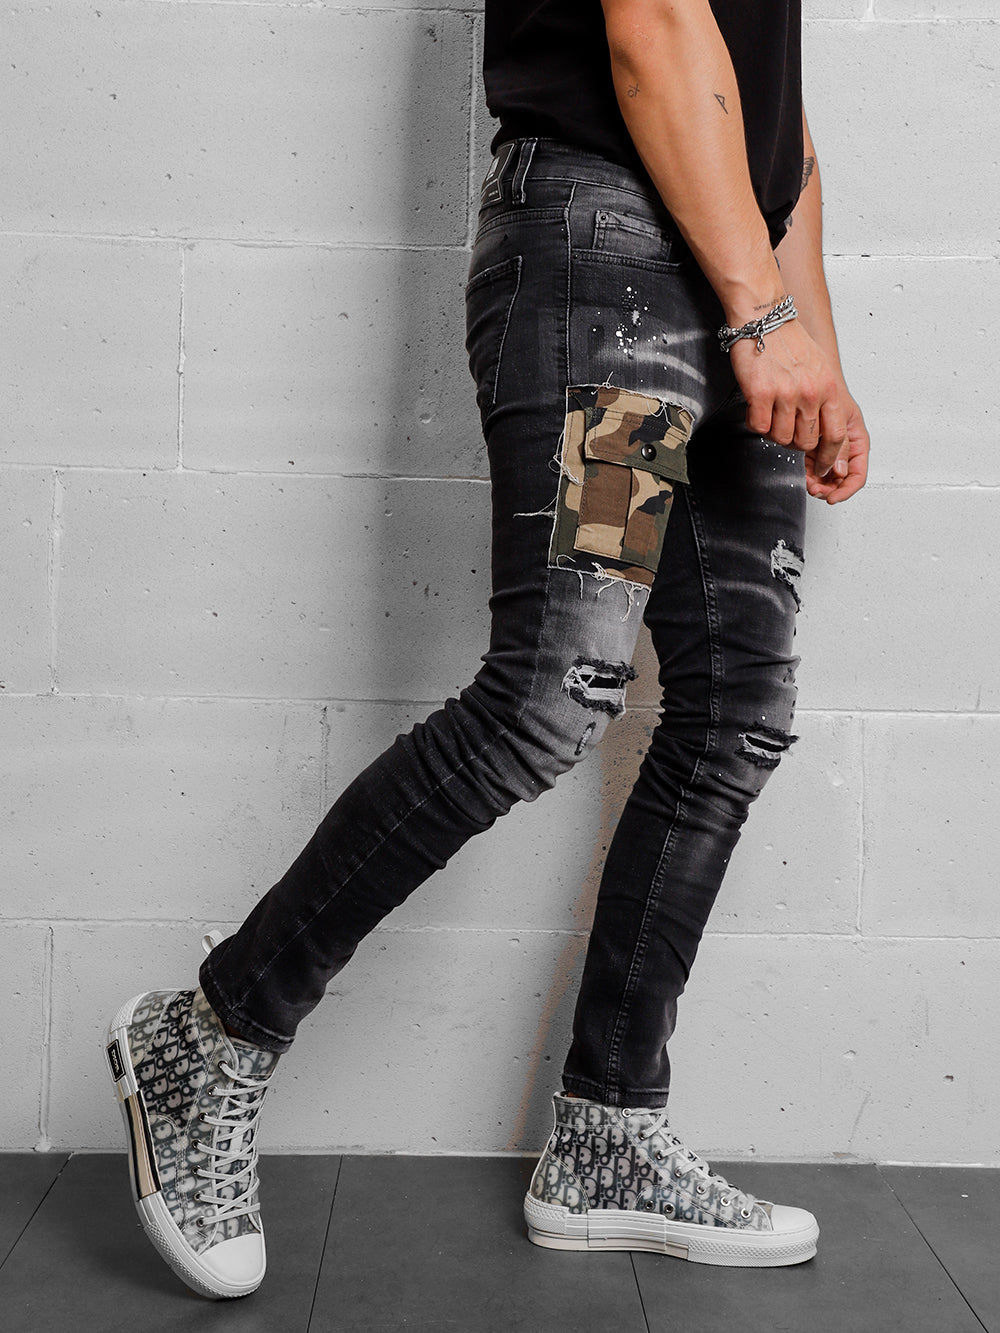 A man wearing CAMOUFLAGE ripped jeans and sneakers.